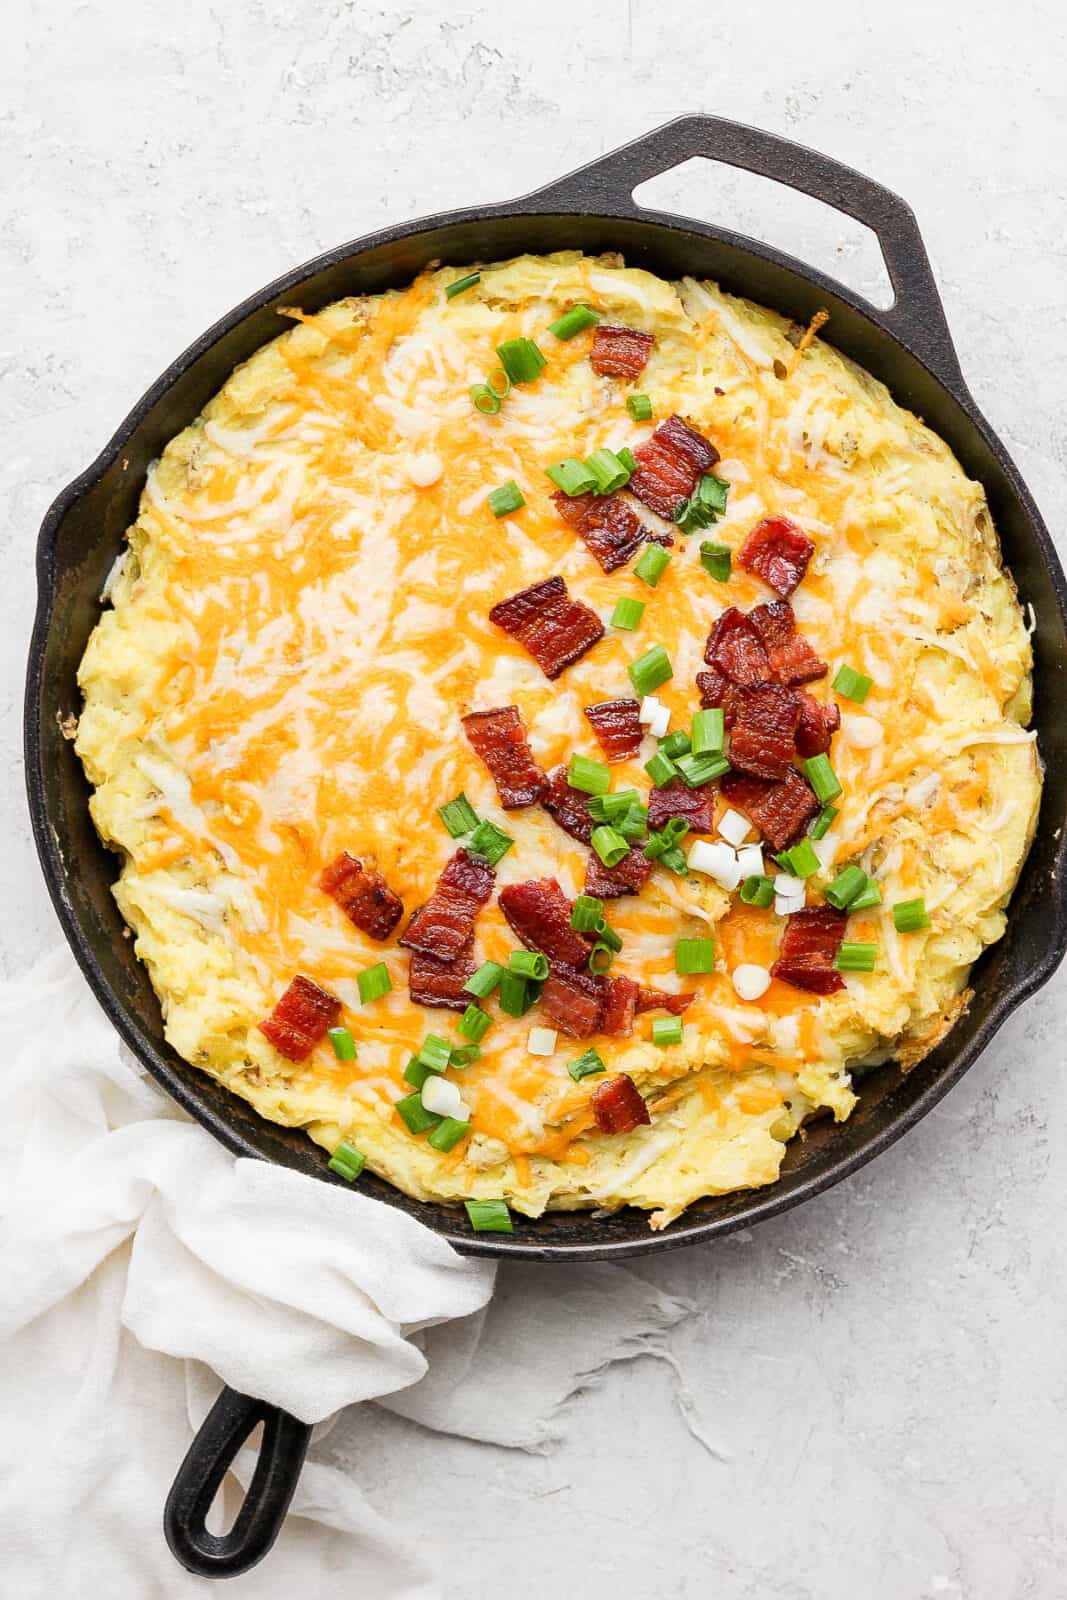 Cast iron skillet filled with smoked mashed potatoes and topped with melted cheese, bacon and green onion.